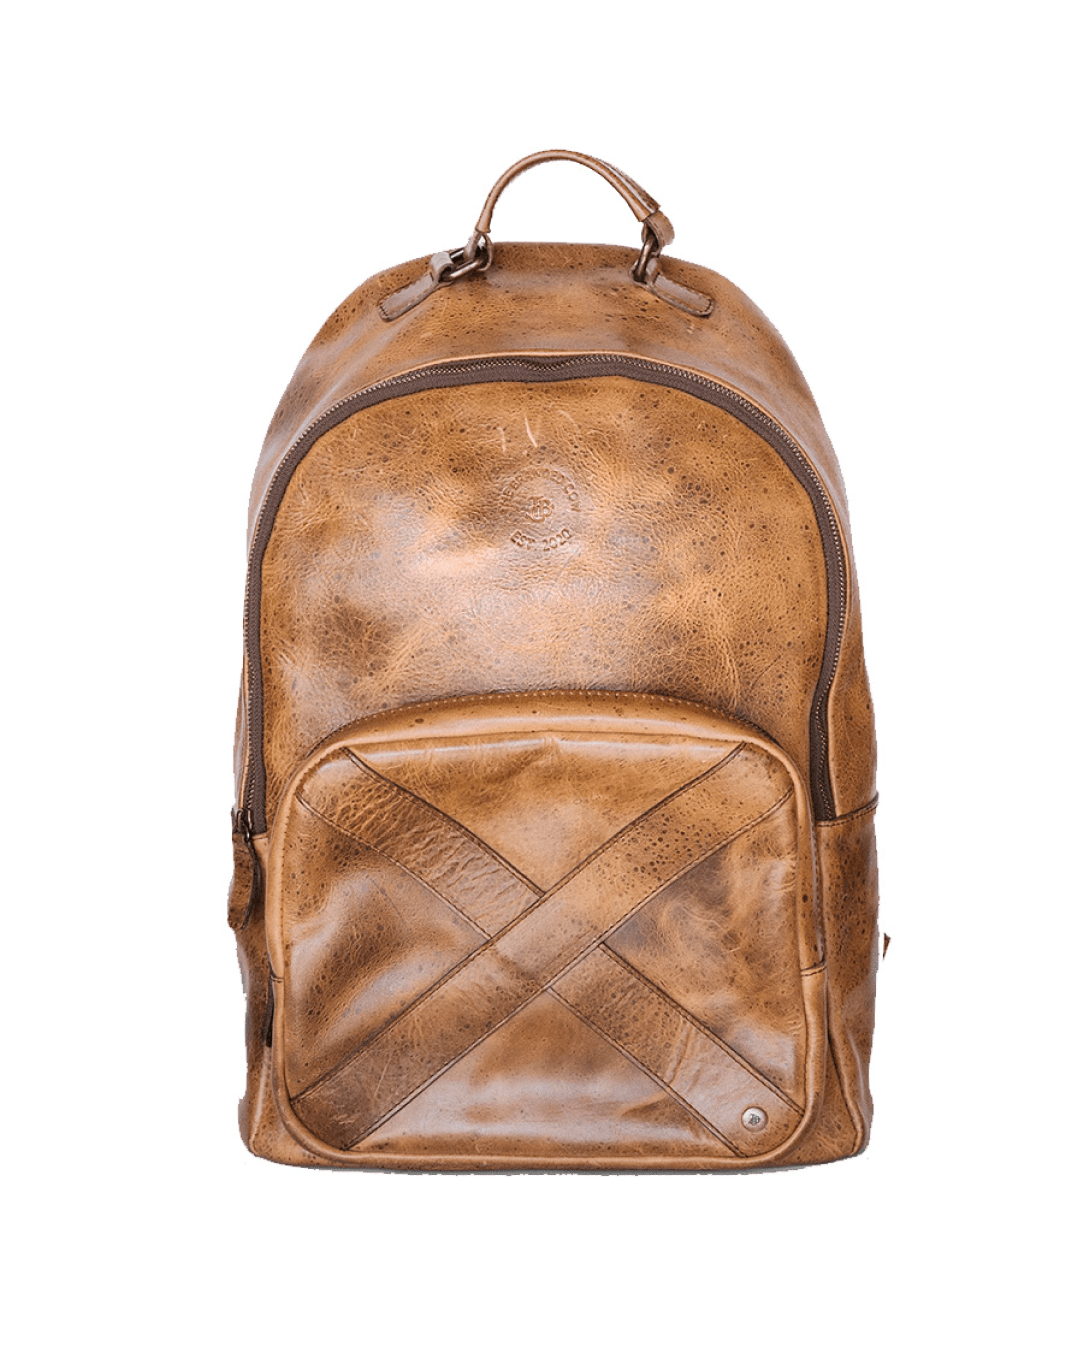 BackPack, Potrero Leather, Color Whiskey